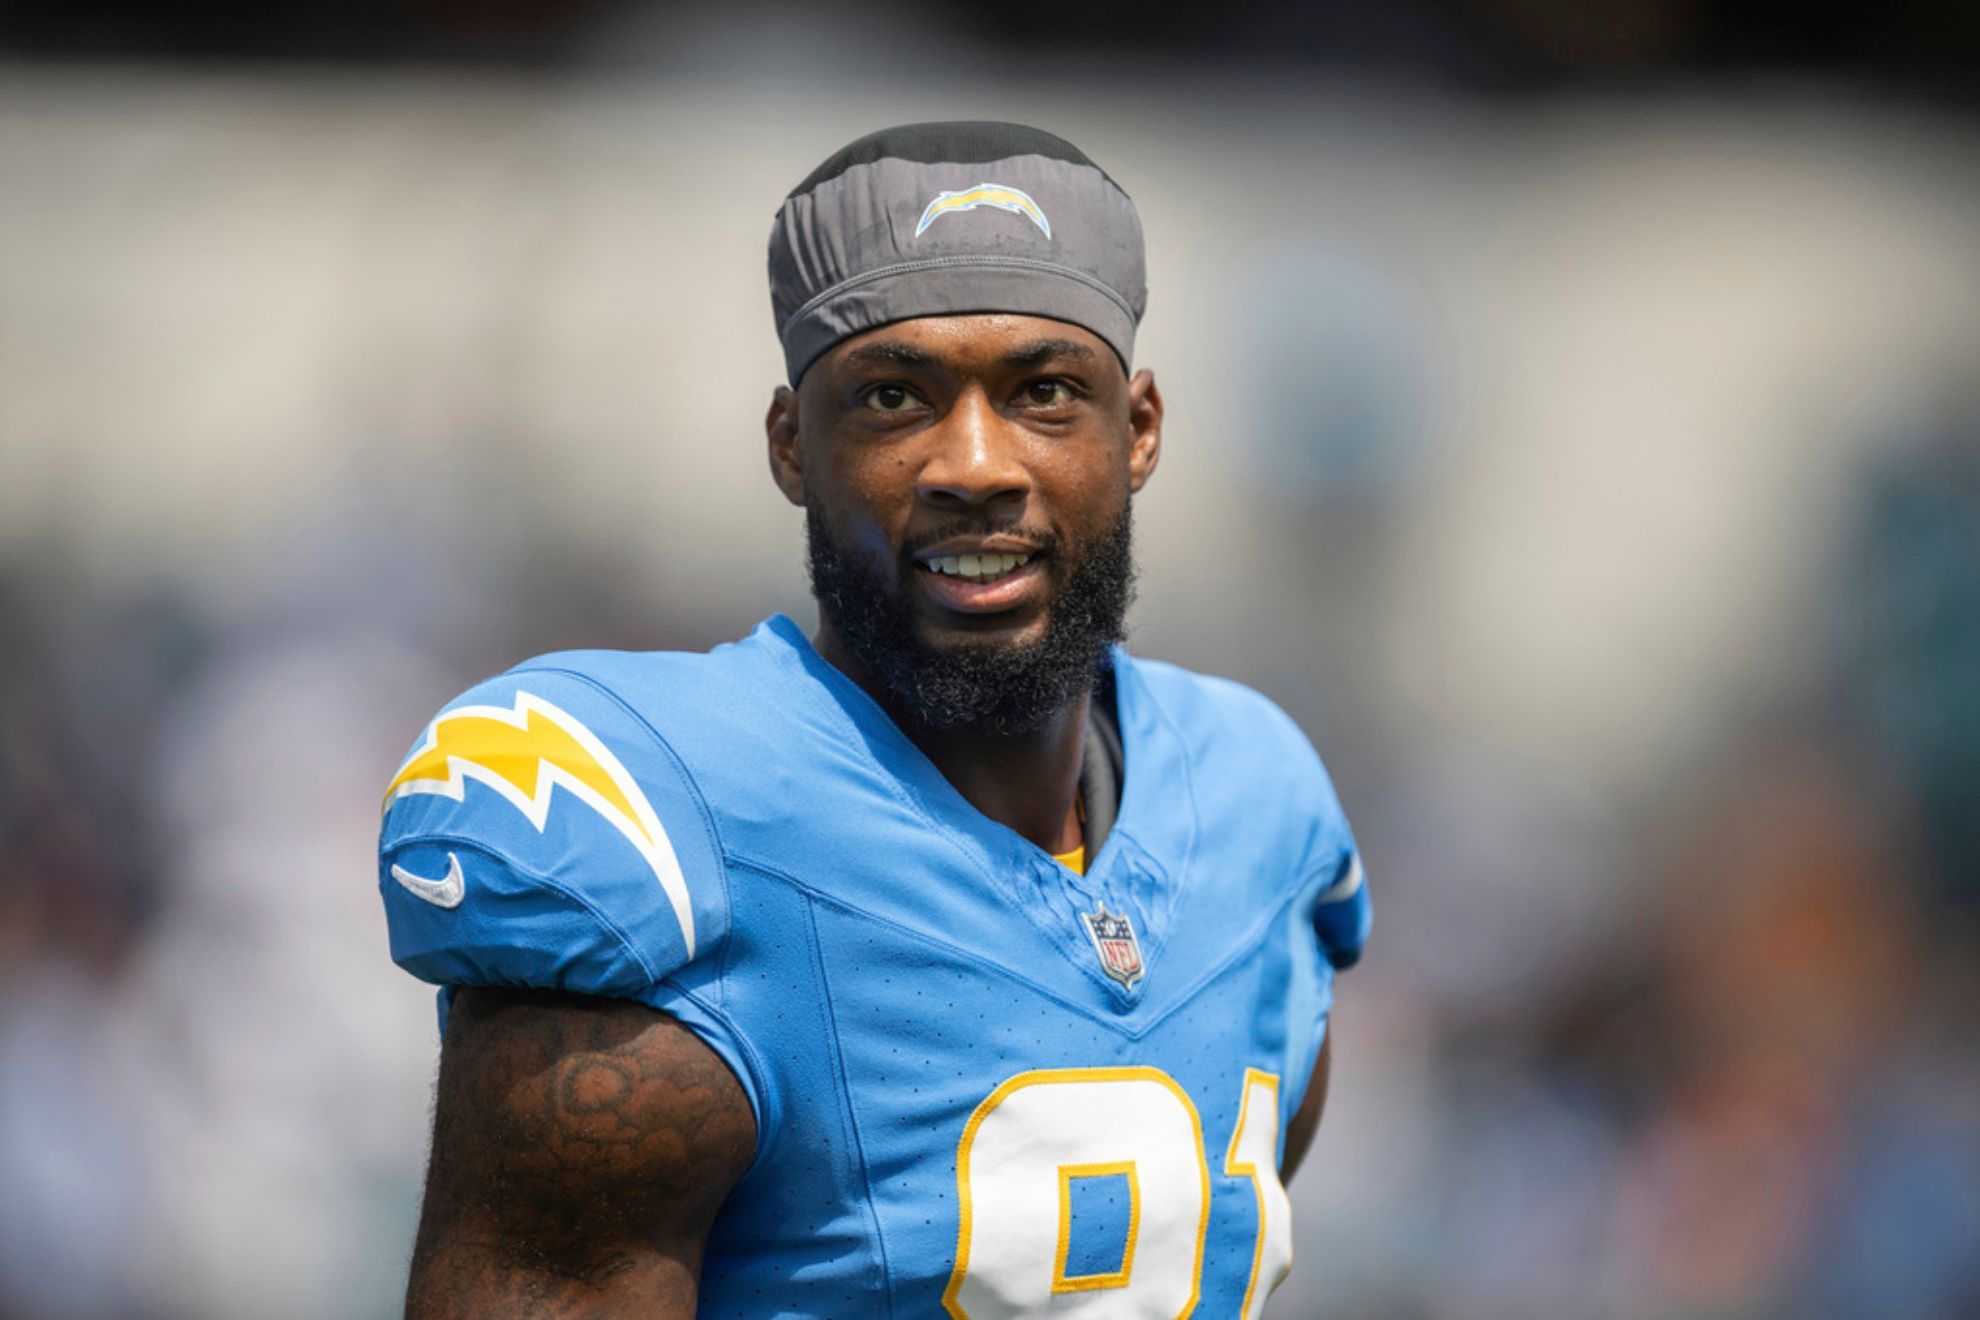 Williams ended his tenure with the Chargers after a disappointing season